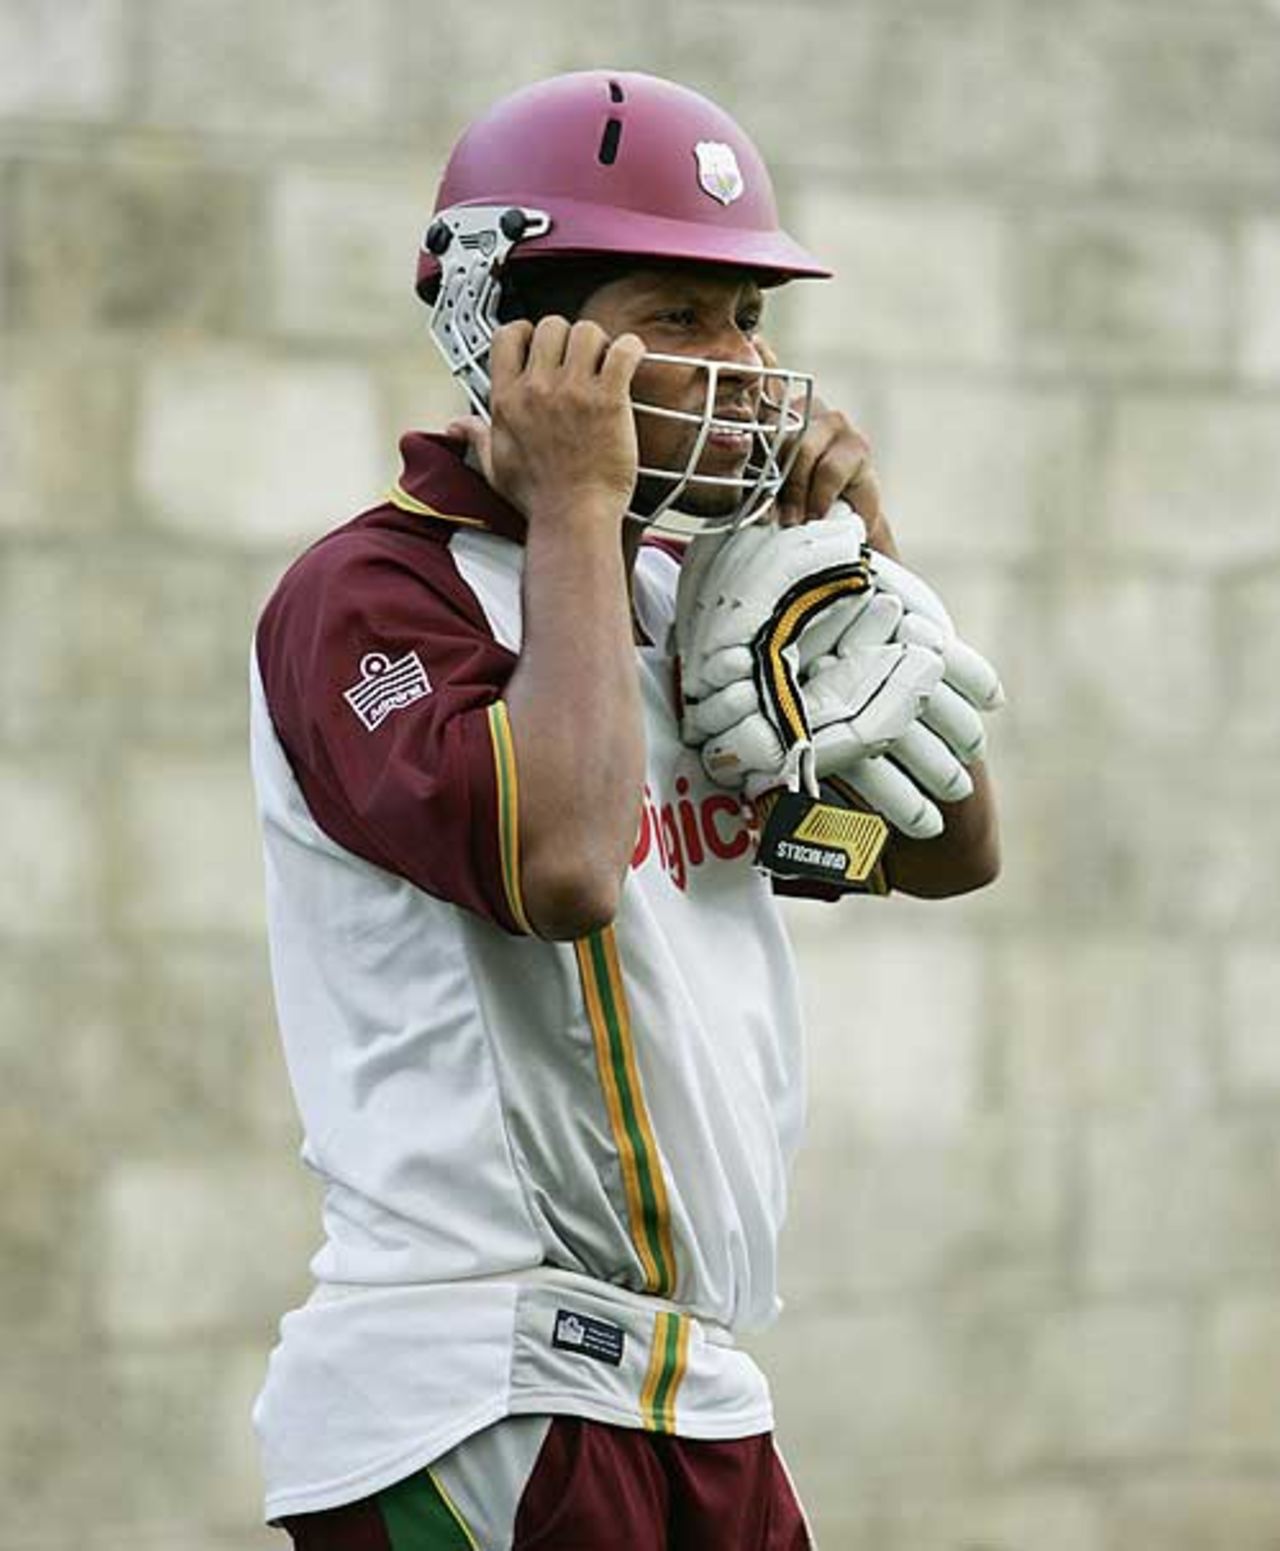 Ramnaresh Sarwan gets ready for a dig at the nets ahead of the final ODI, Beausejour Stadium, Saint Lucia, April 15, 2008